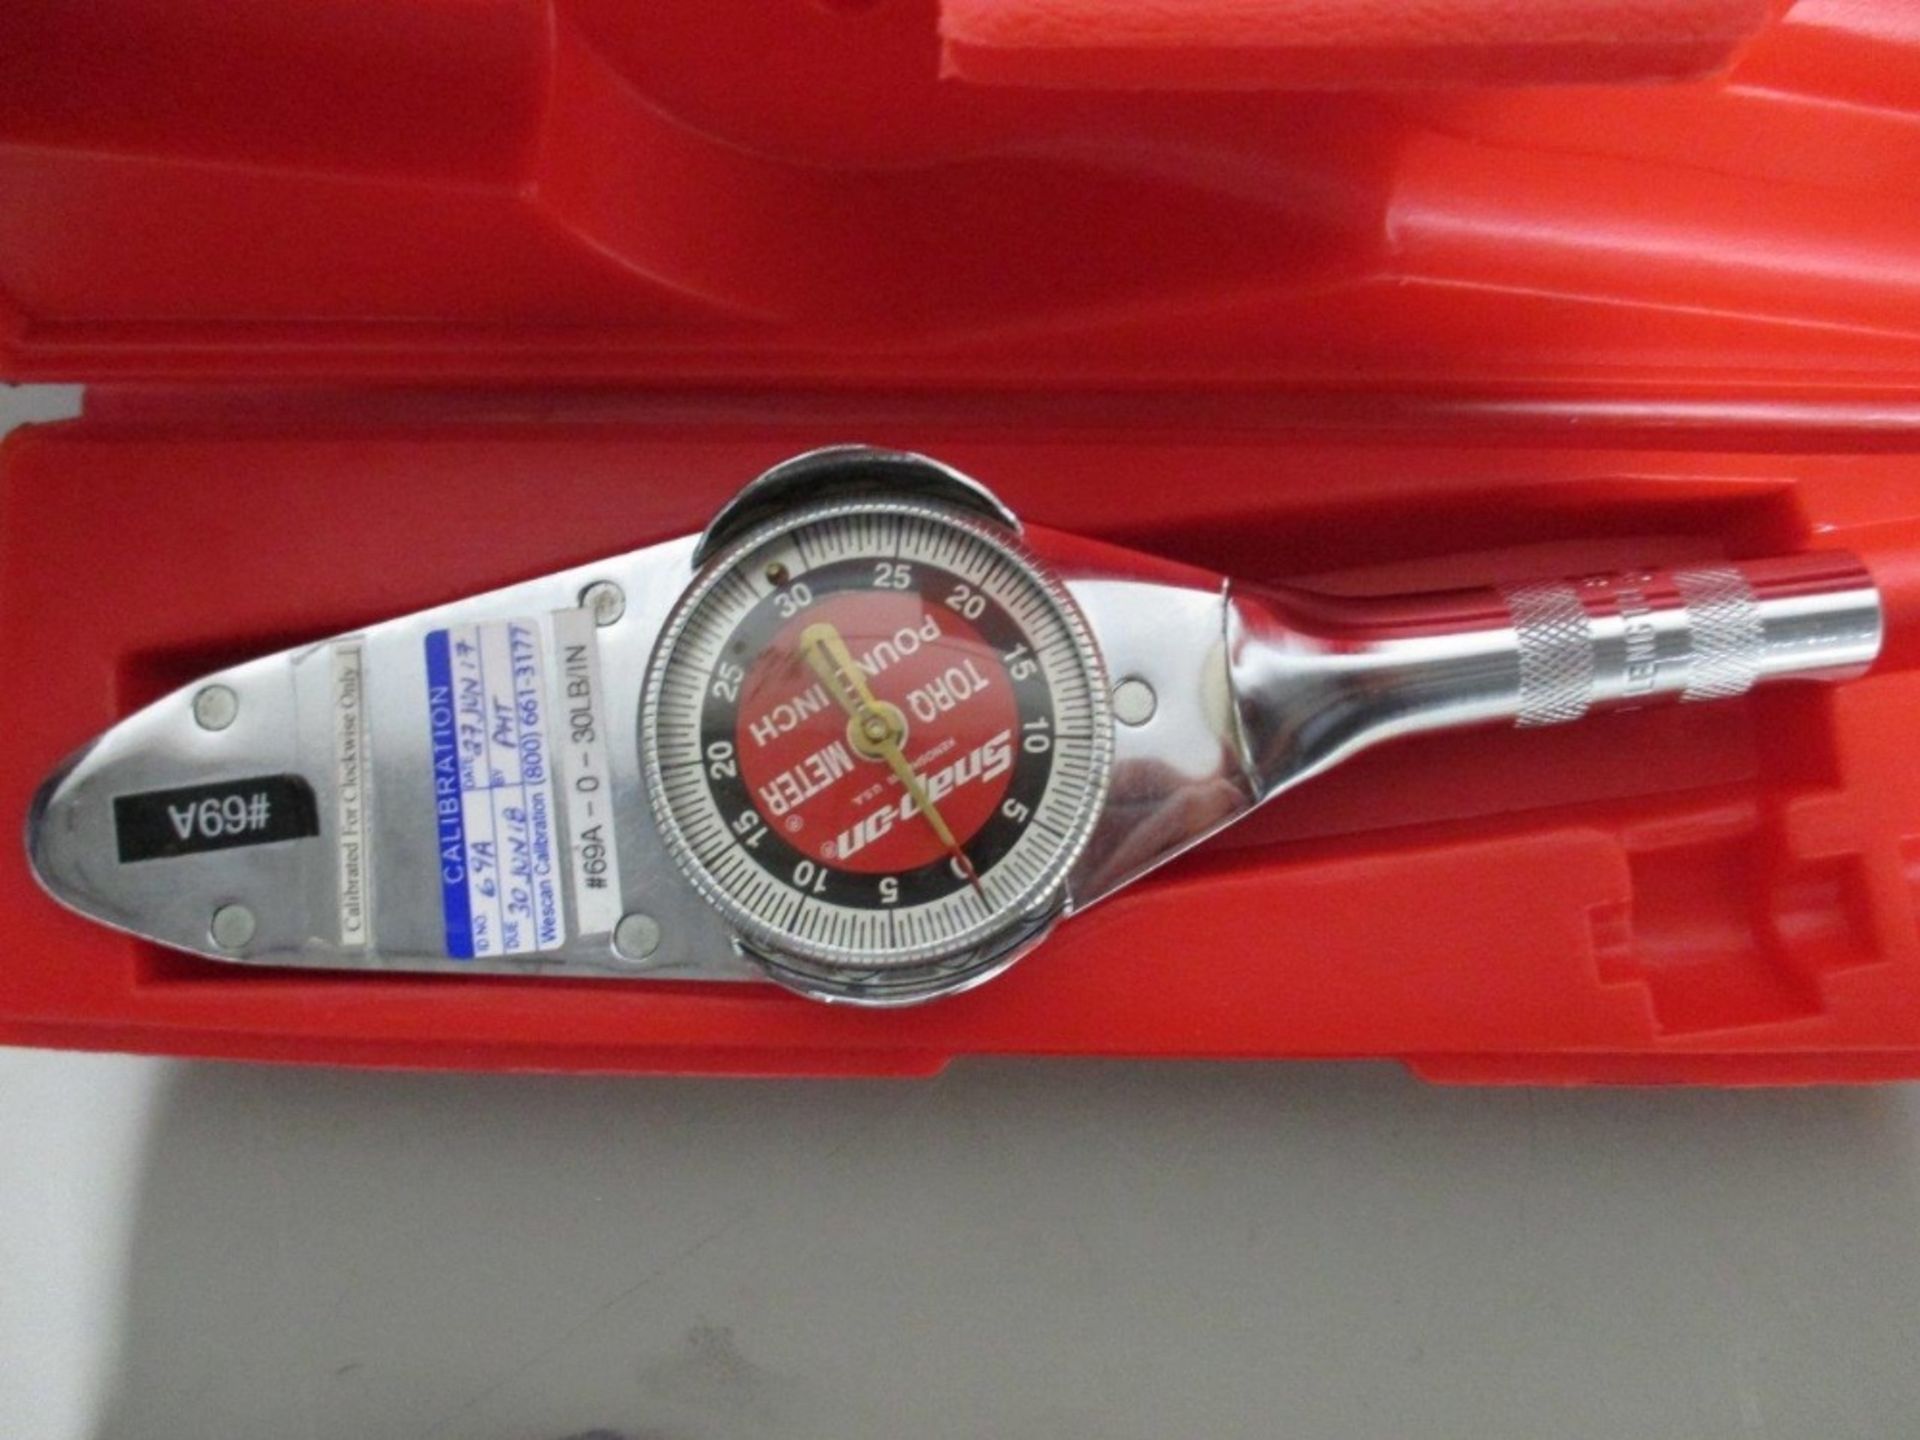 2 x Snap On Torque Wrench 1 x 15lb Torque Wrench 1 x 30lb Torque Wrench 2 x Snap On Torque Wrench - Image 2 of 3